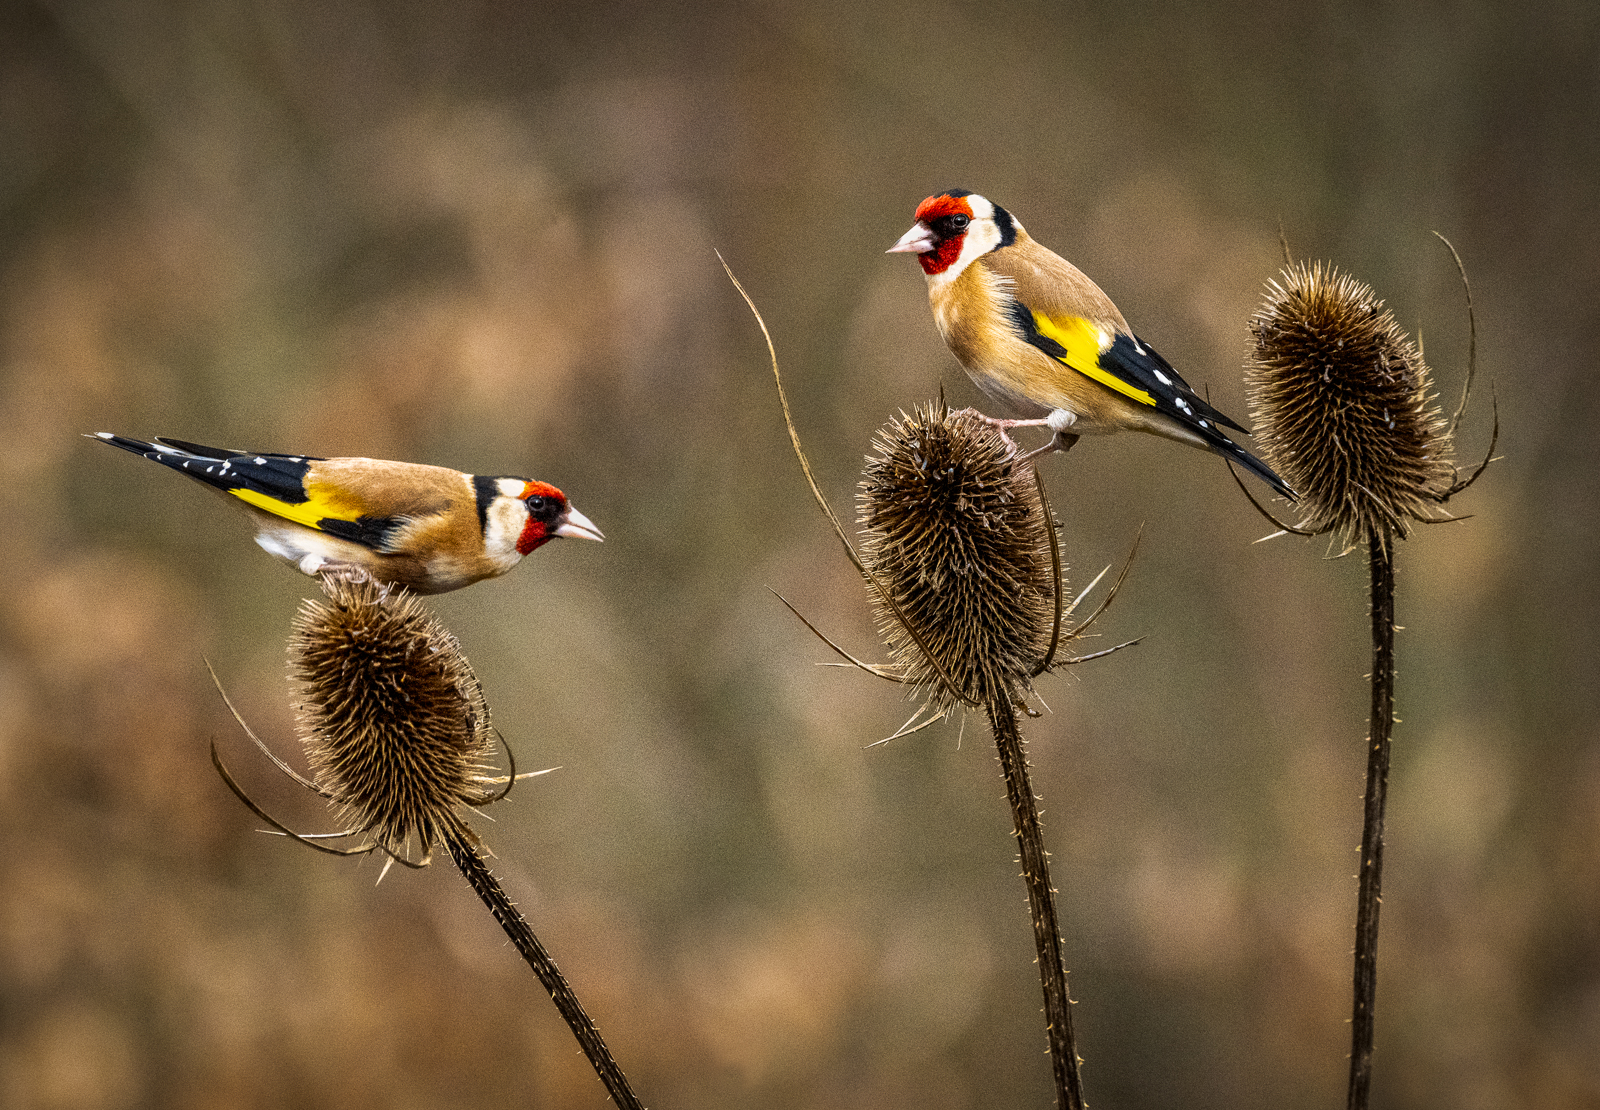 GOLDFINCHES AND TEASELS